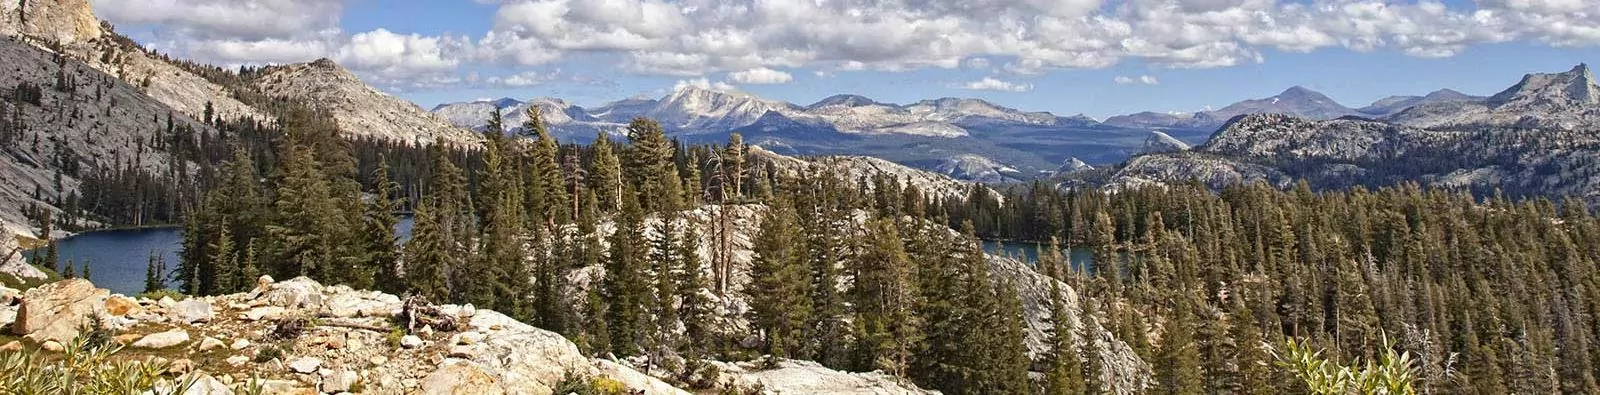 Beautiful view of Sequoia and Kings Canyon National Parks